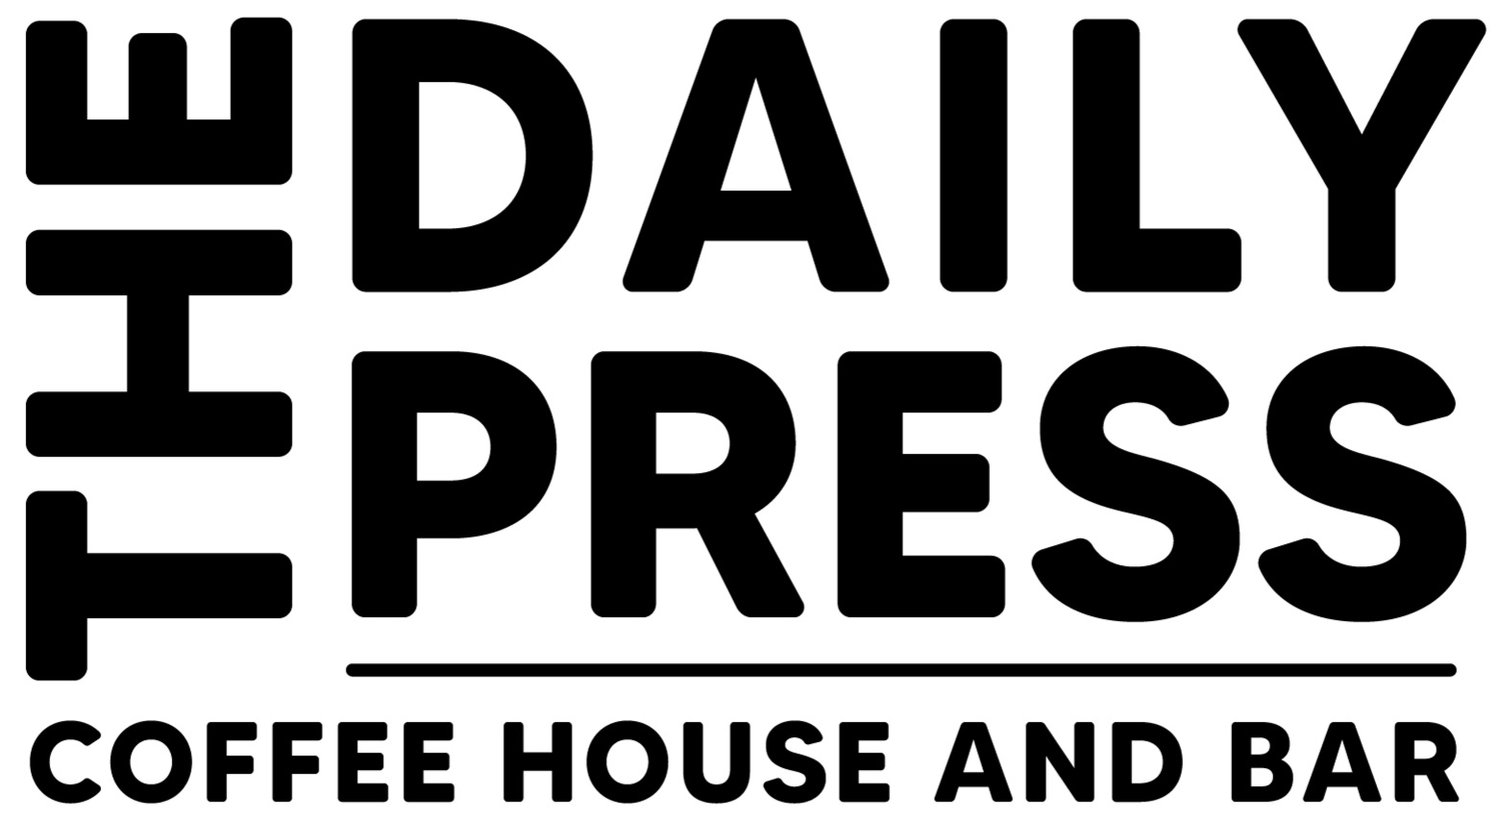 The Daily Press